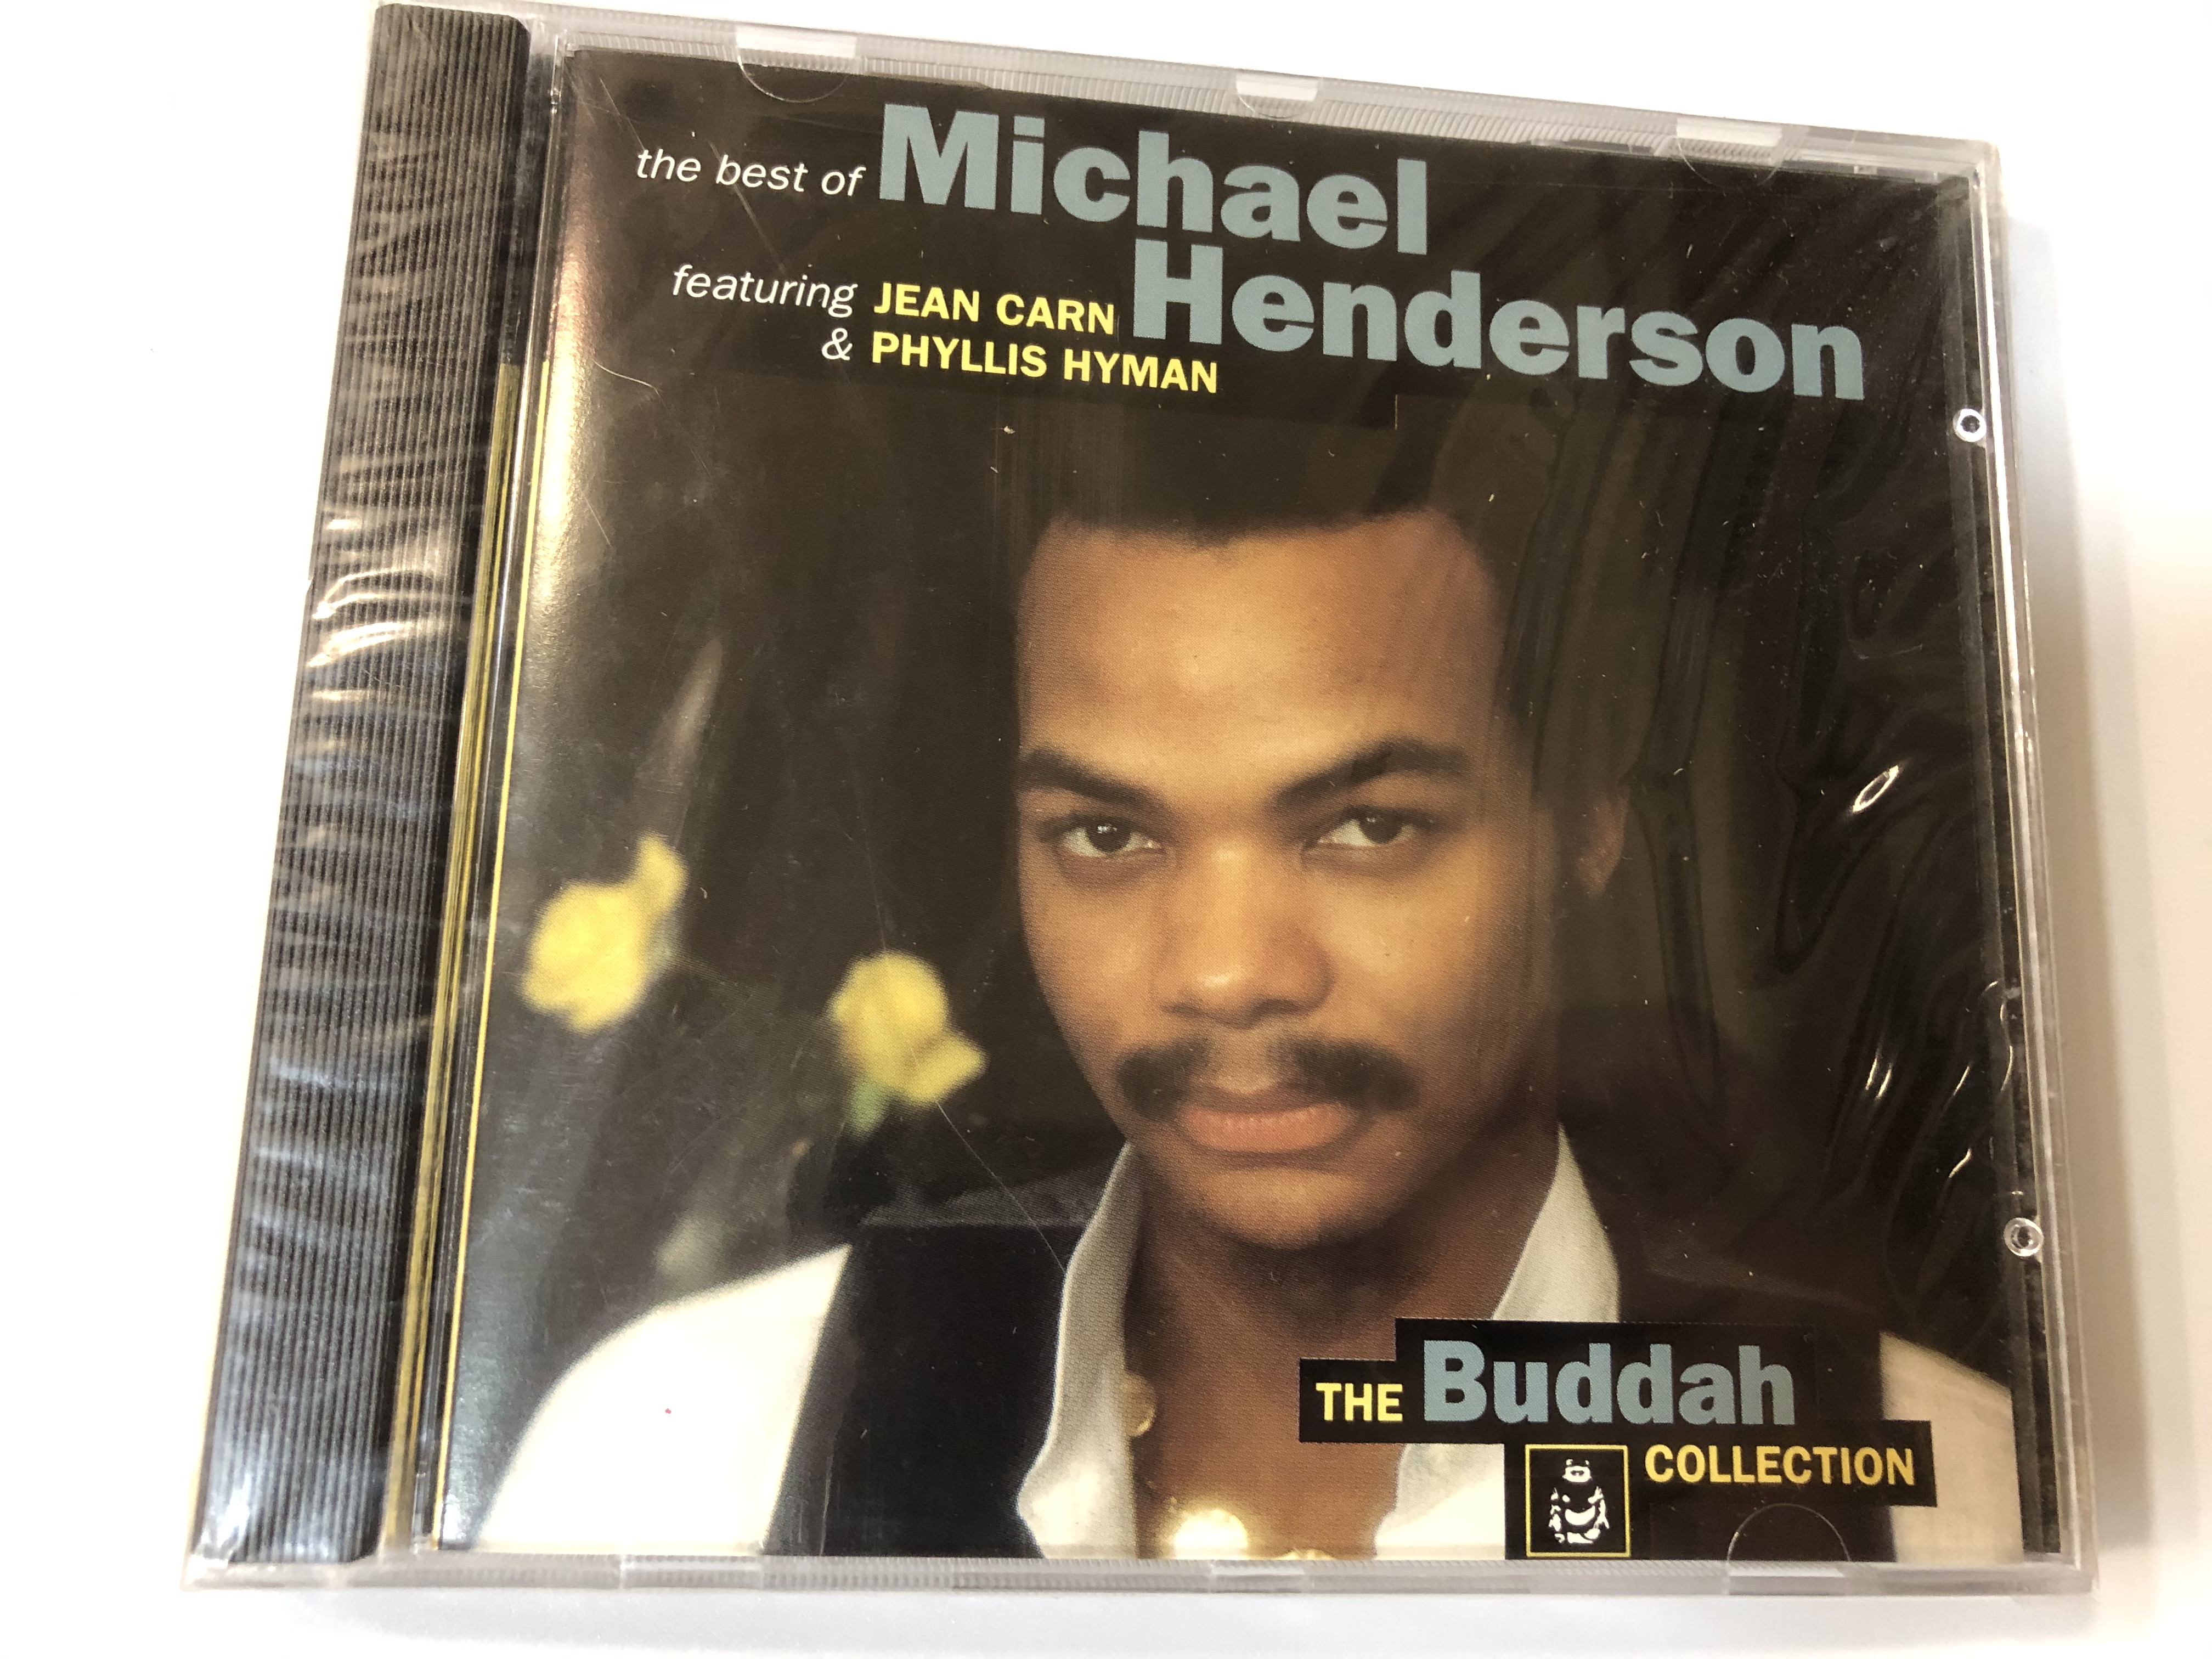 the-best-of-michael-henderson-featuring-jean-carn-phyllis-hyman-the-buddah-collection-sequel-records-audio-cd-nex-cd-117-1-.jpg